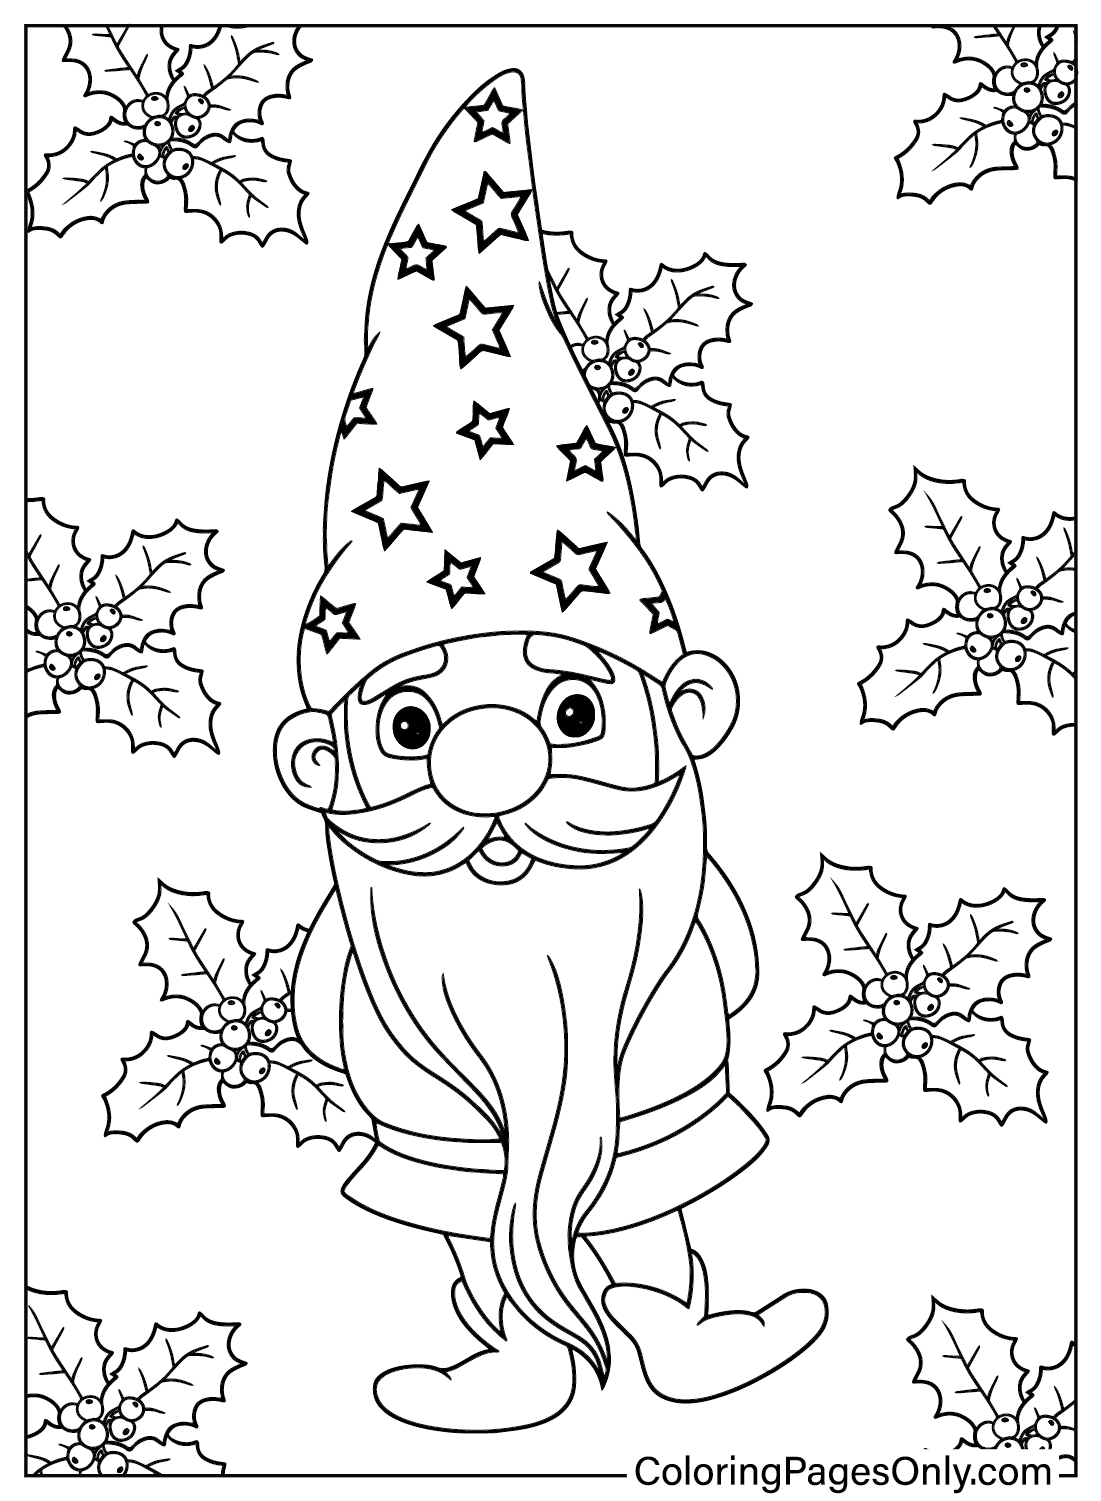 86 Gnome Coloring Pages - ColoringPagesOnly.com